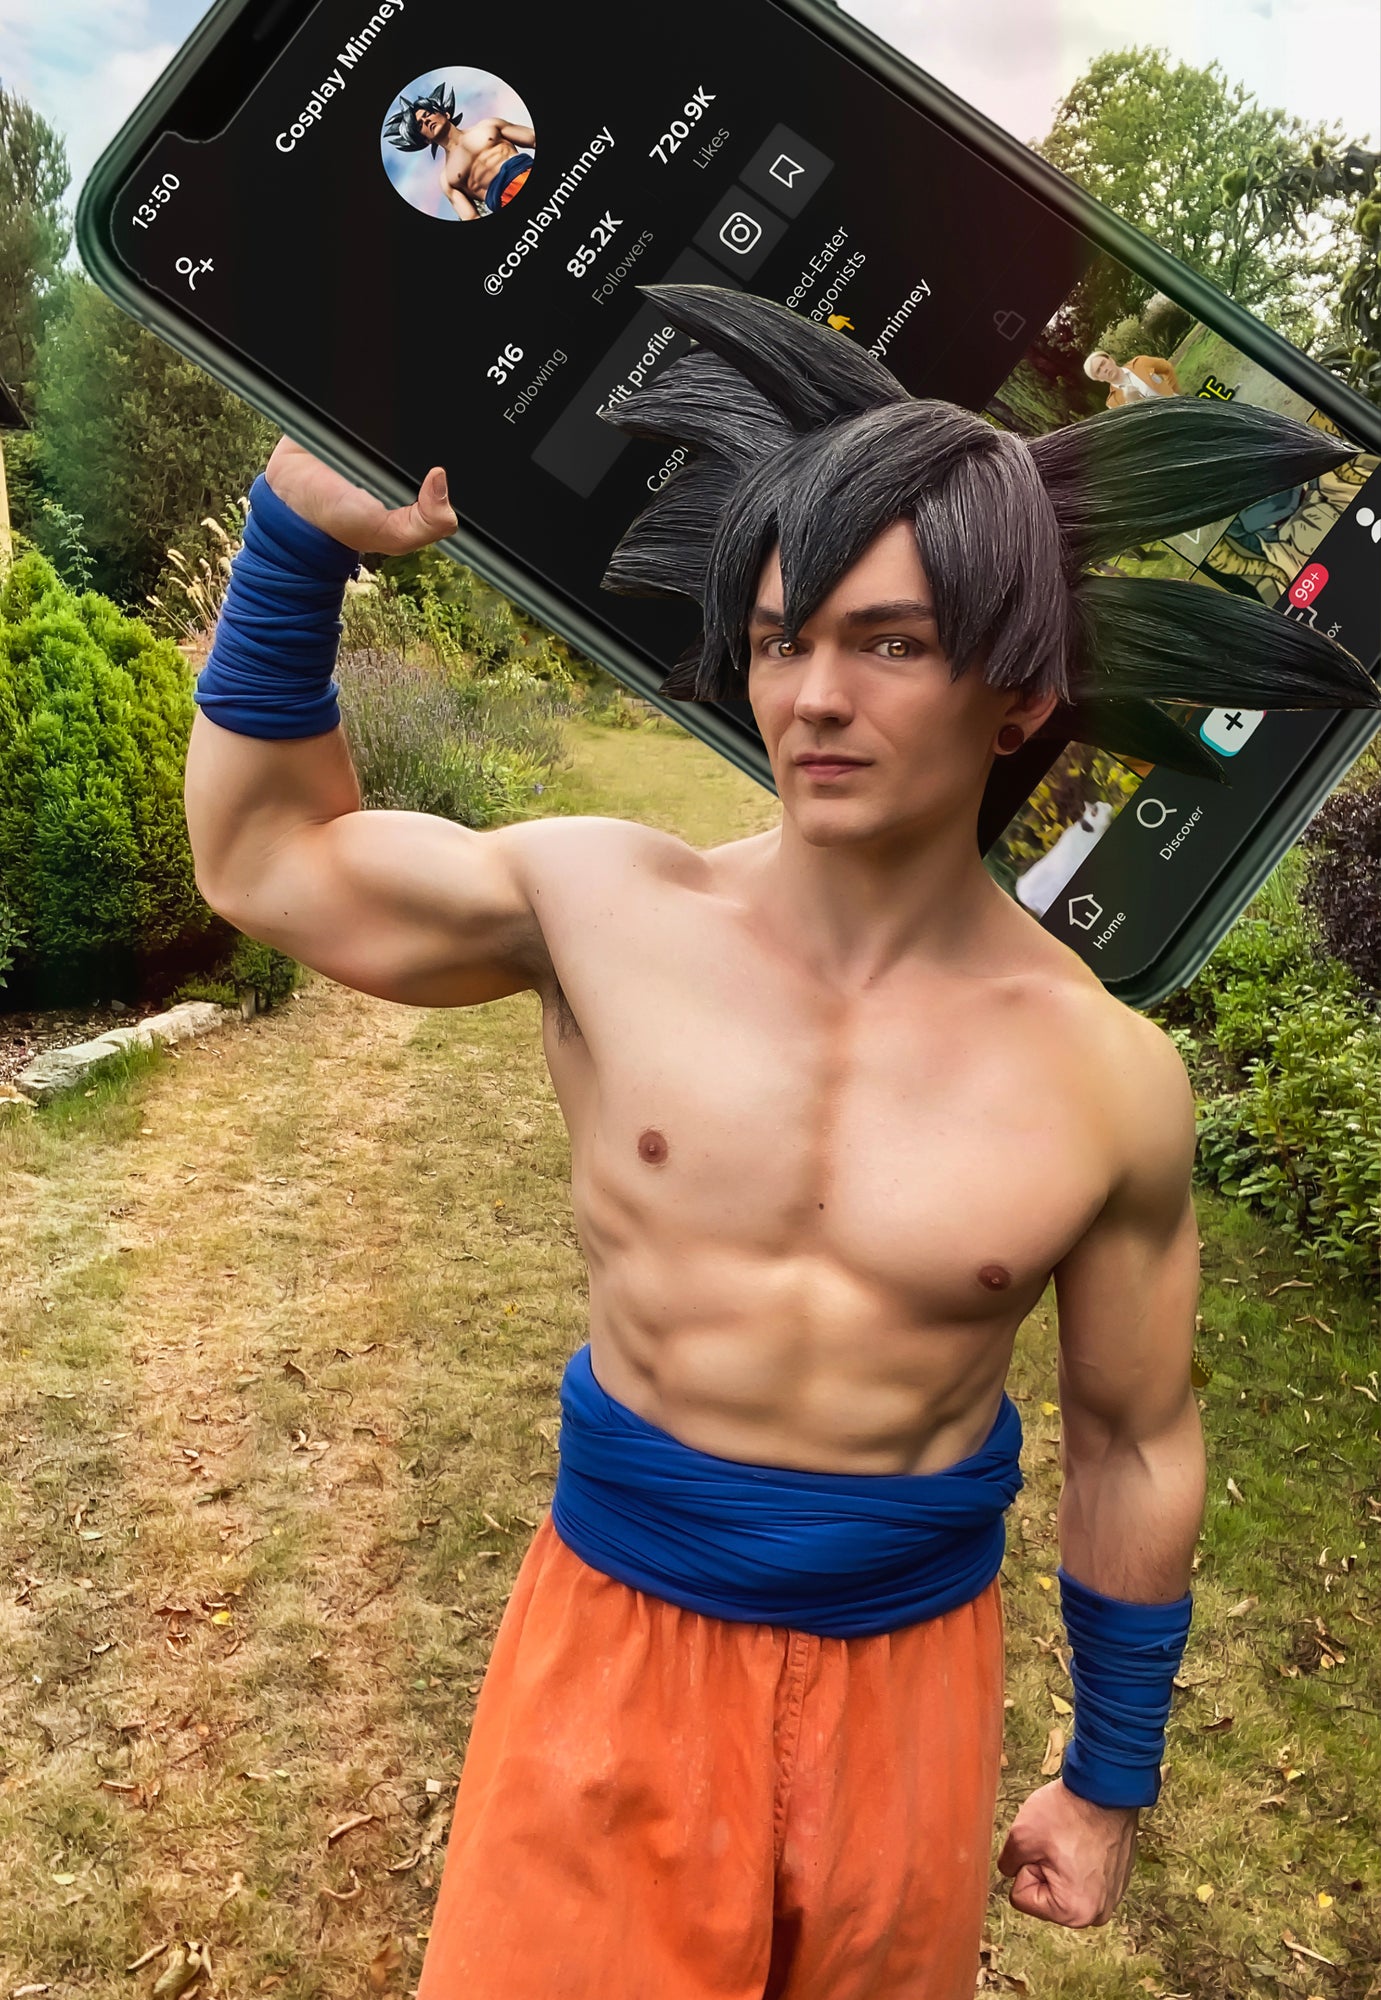 Why every cosplayer should get on tiktok if they want to get noticed - Tiktok Goku Cosplay Minney speaks out